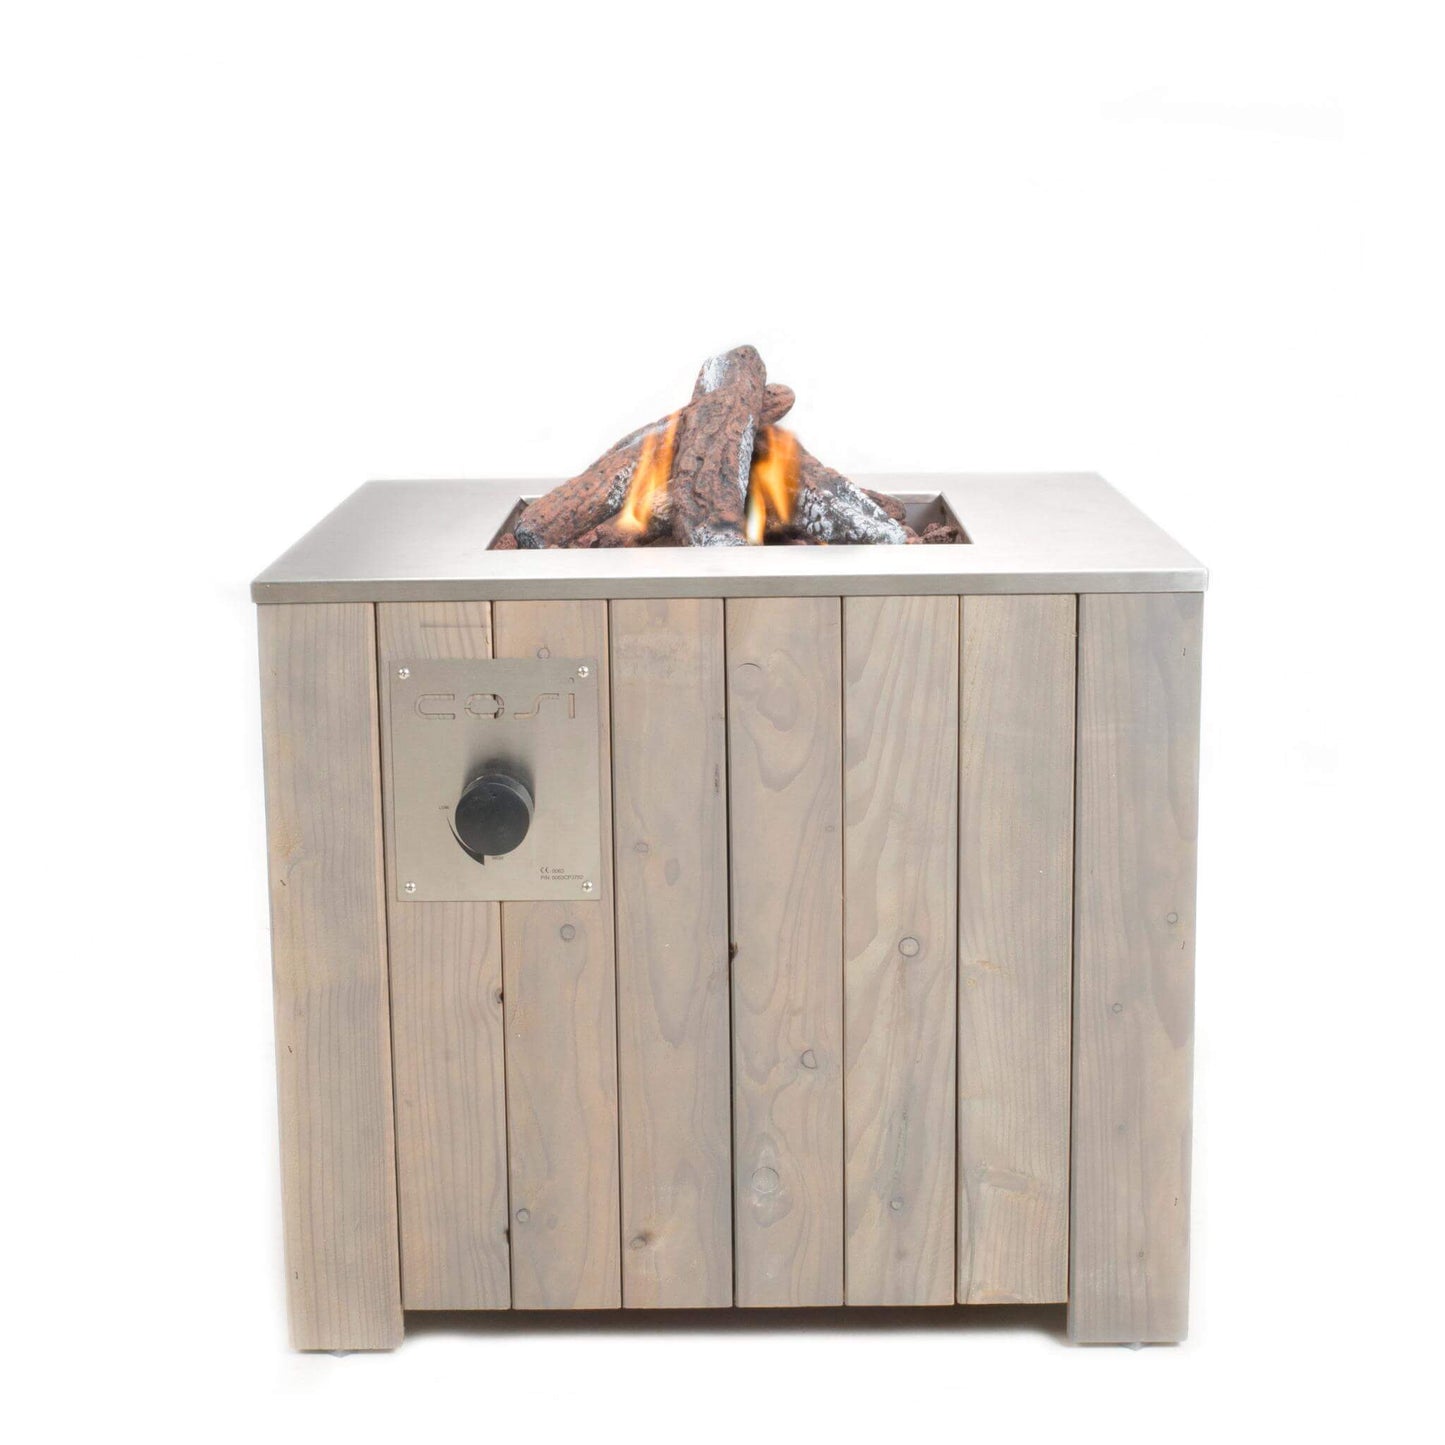 Cosicube 70 Black or Grey Square Wood Outdoor Gas Fire Pit